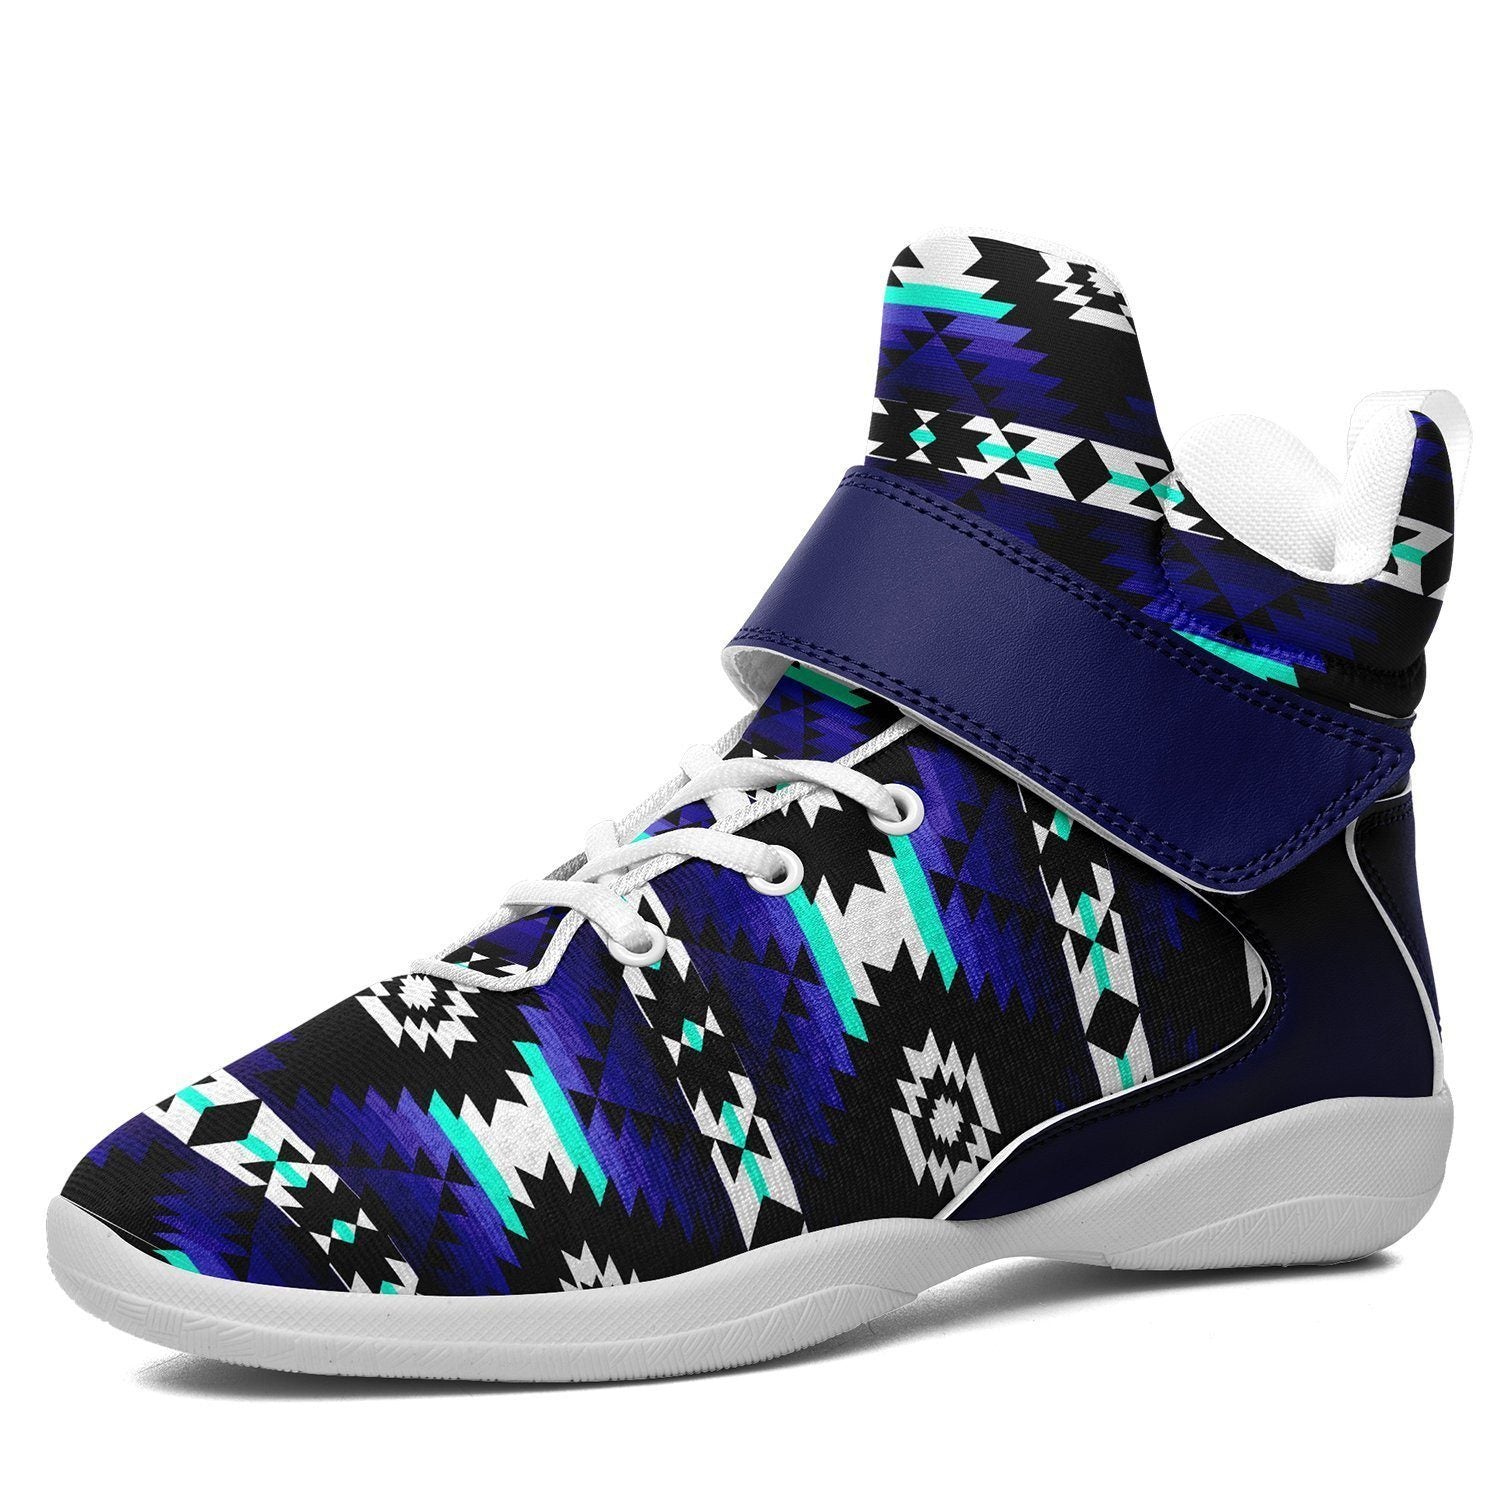 Cree Confederacy Midnight Kid's Ipottaa Basketball / Sport High Top Shoes 49 Dzine US Women 4.5 / US Youth 3.5 / EUR 35 White Sole with Blue Strap 